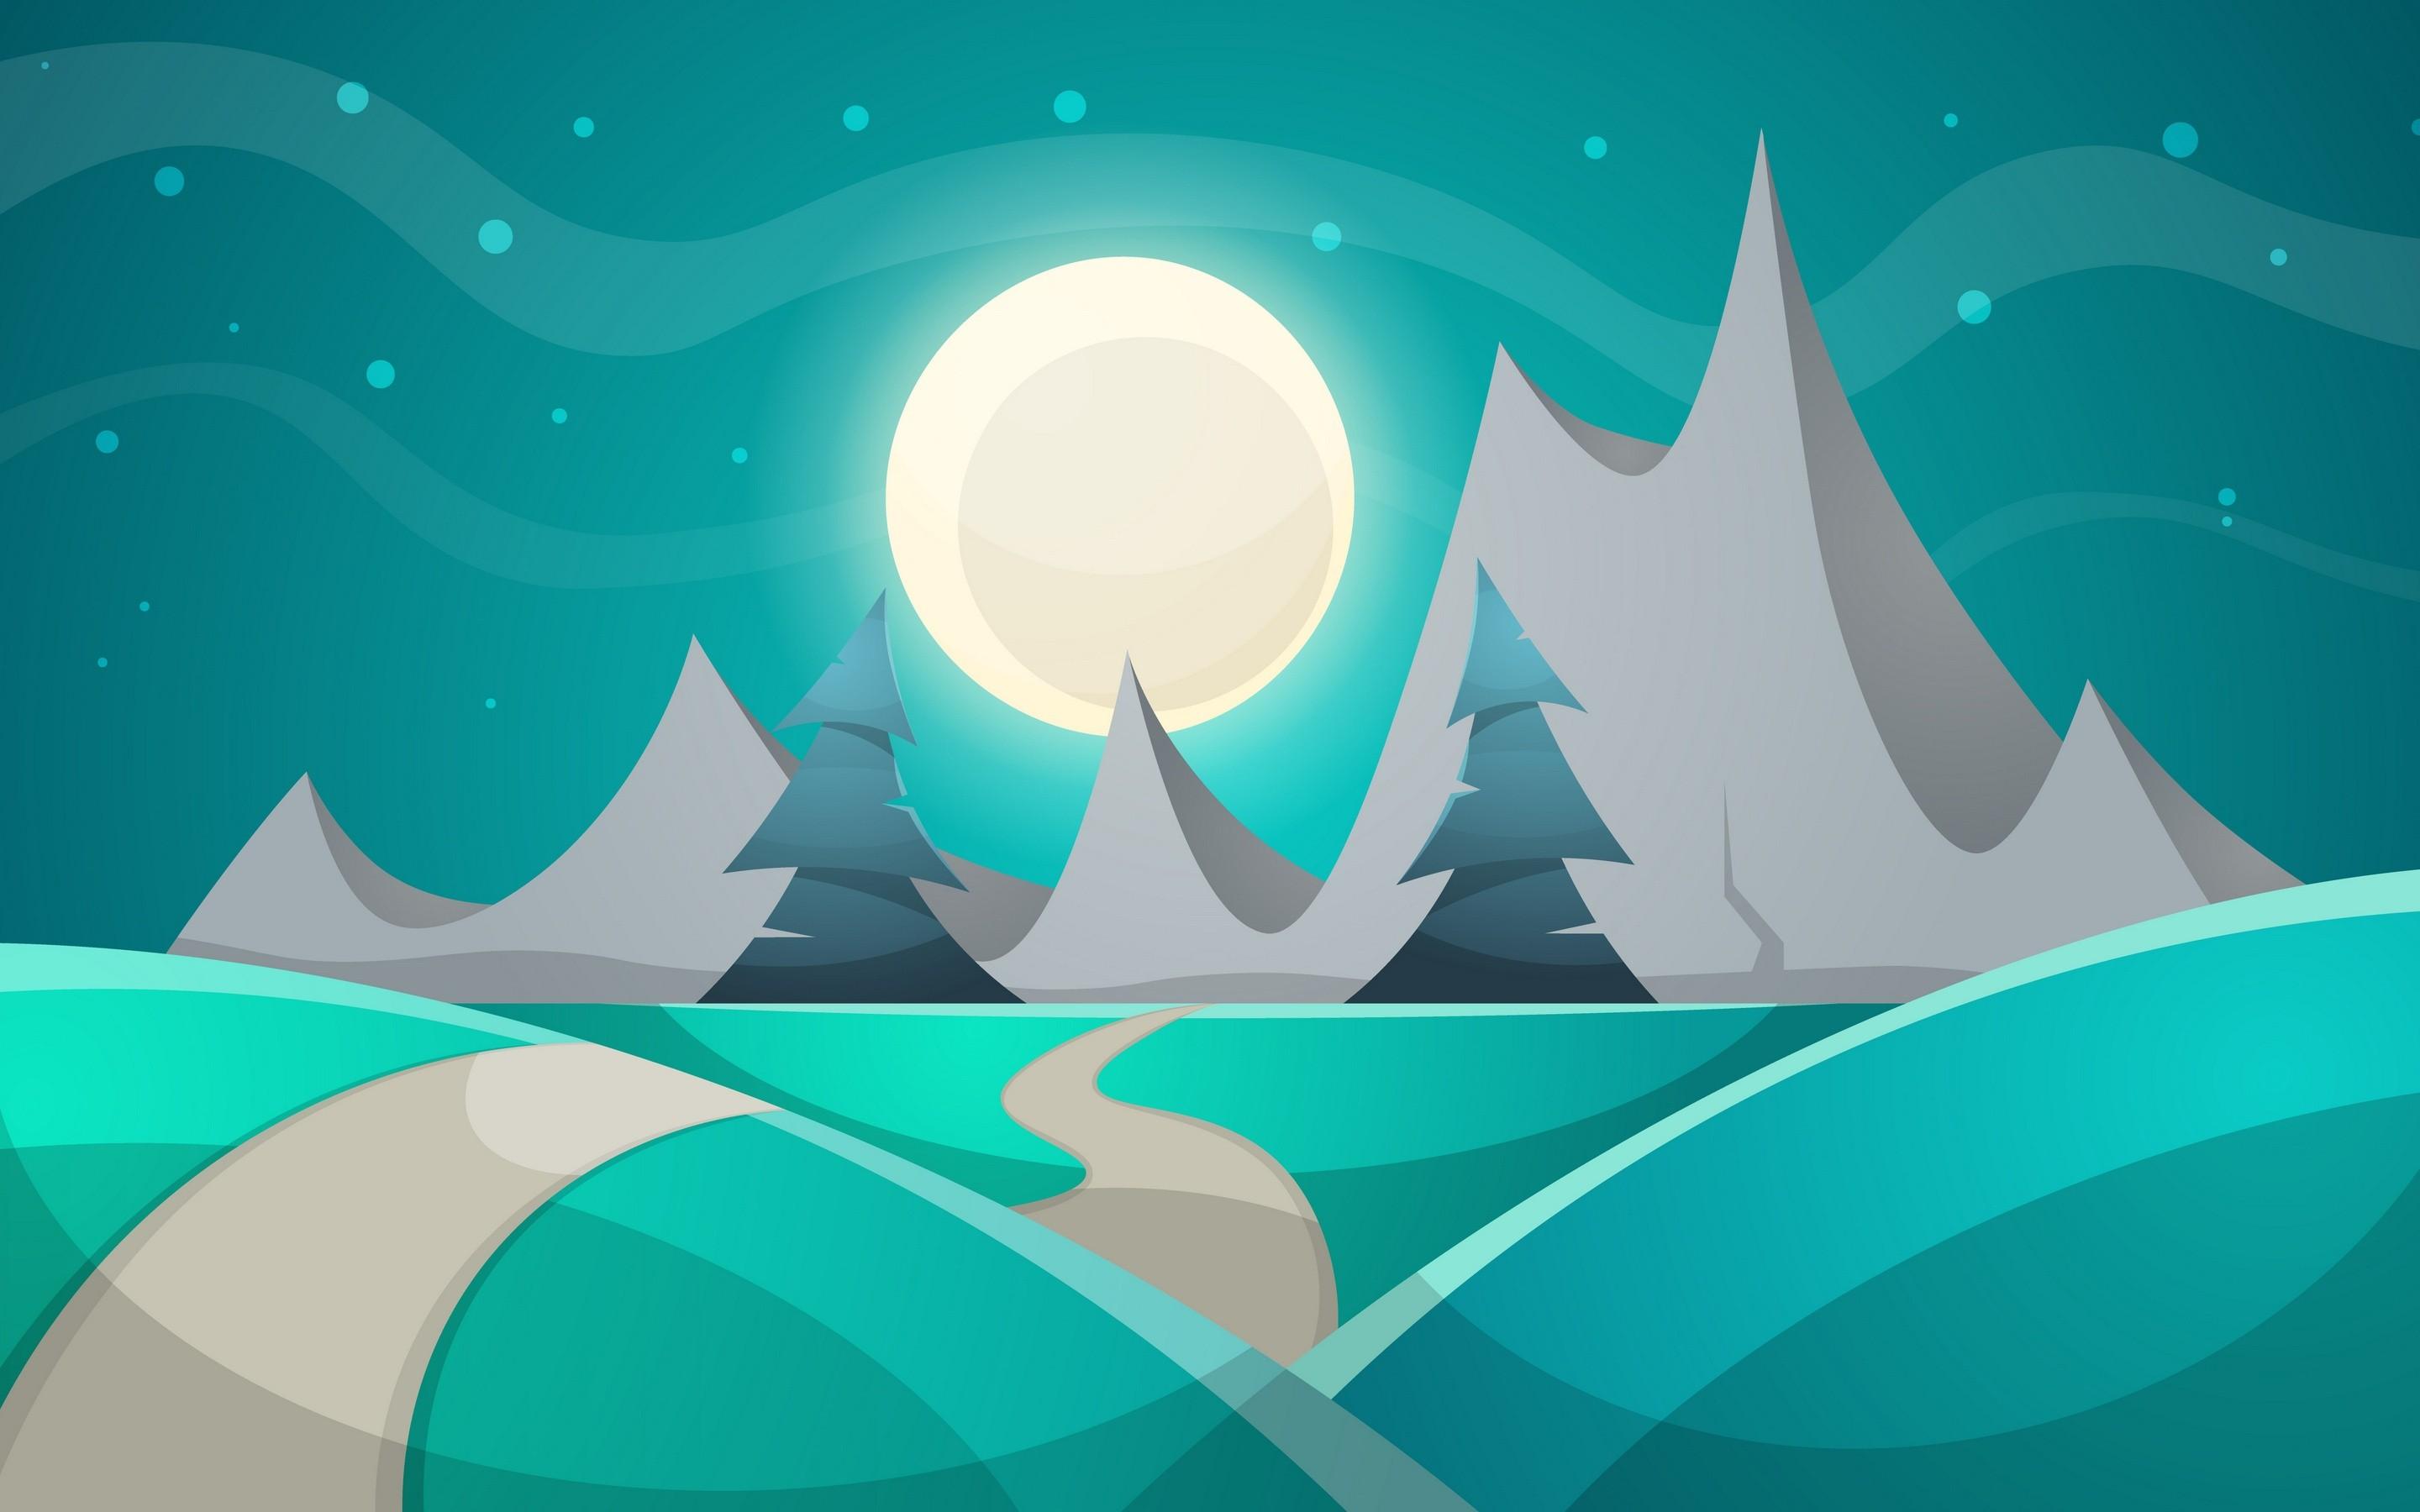 Download wallpaper nightscape, moon, mountains, abstract landscape